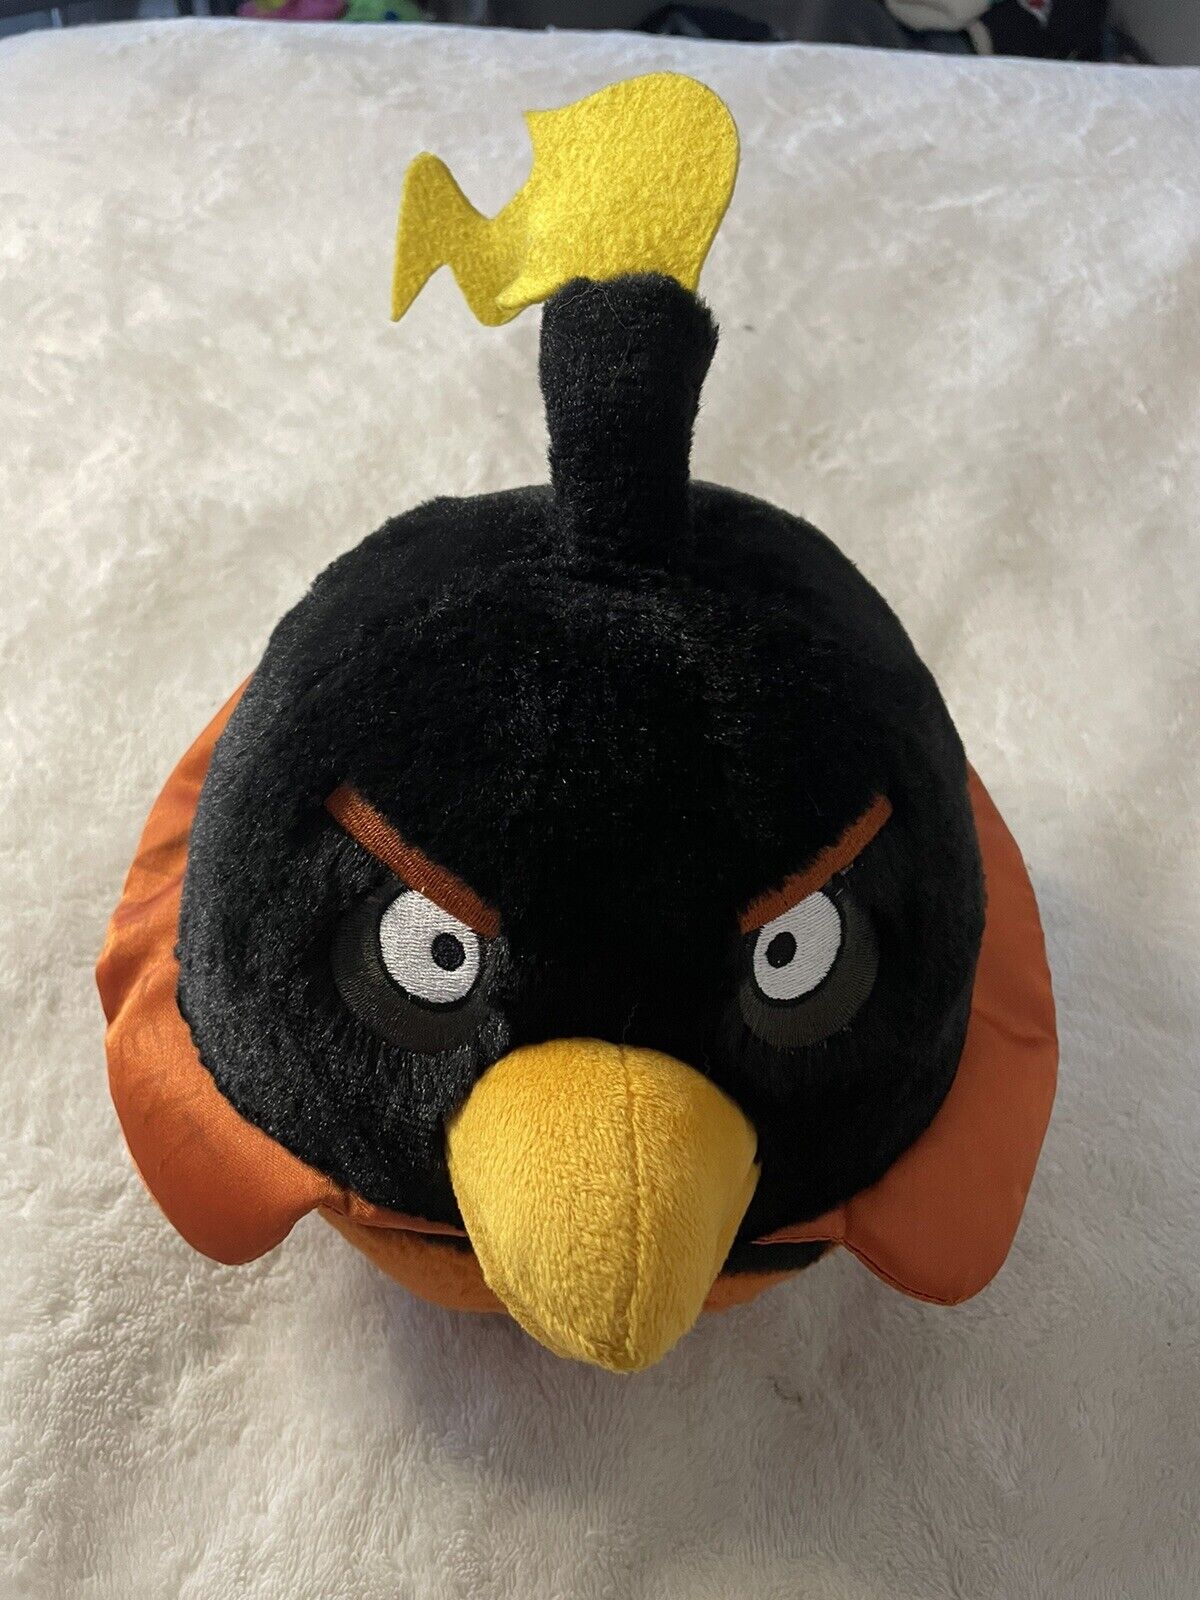 ANGRY BIRDS BLACK BIRD PLUSH FIG 9 inches 2012